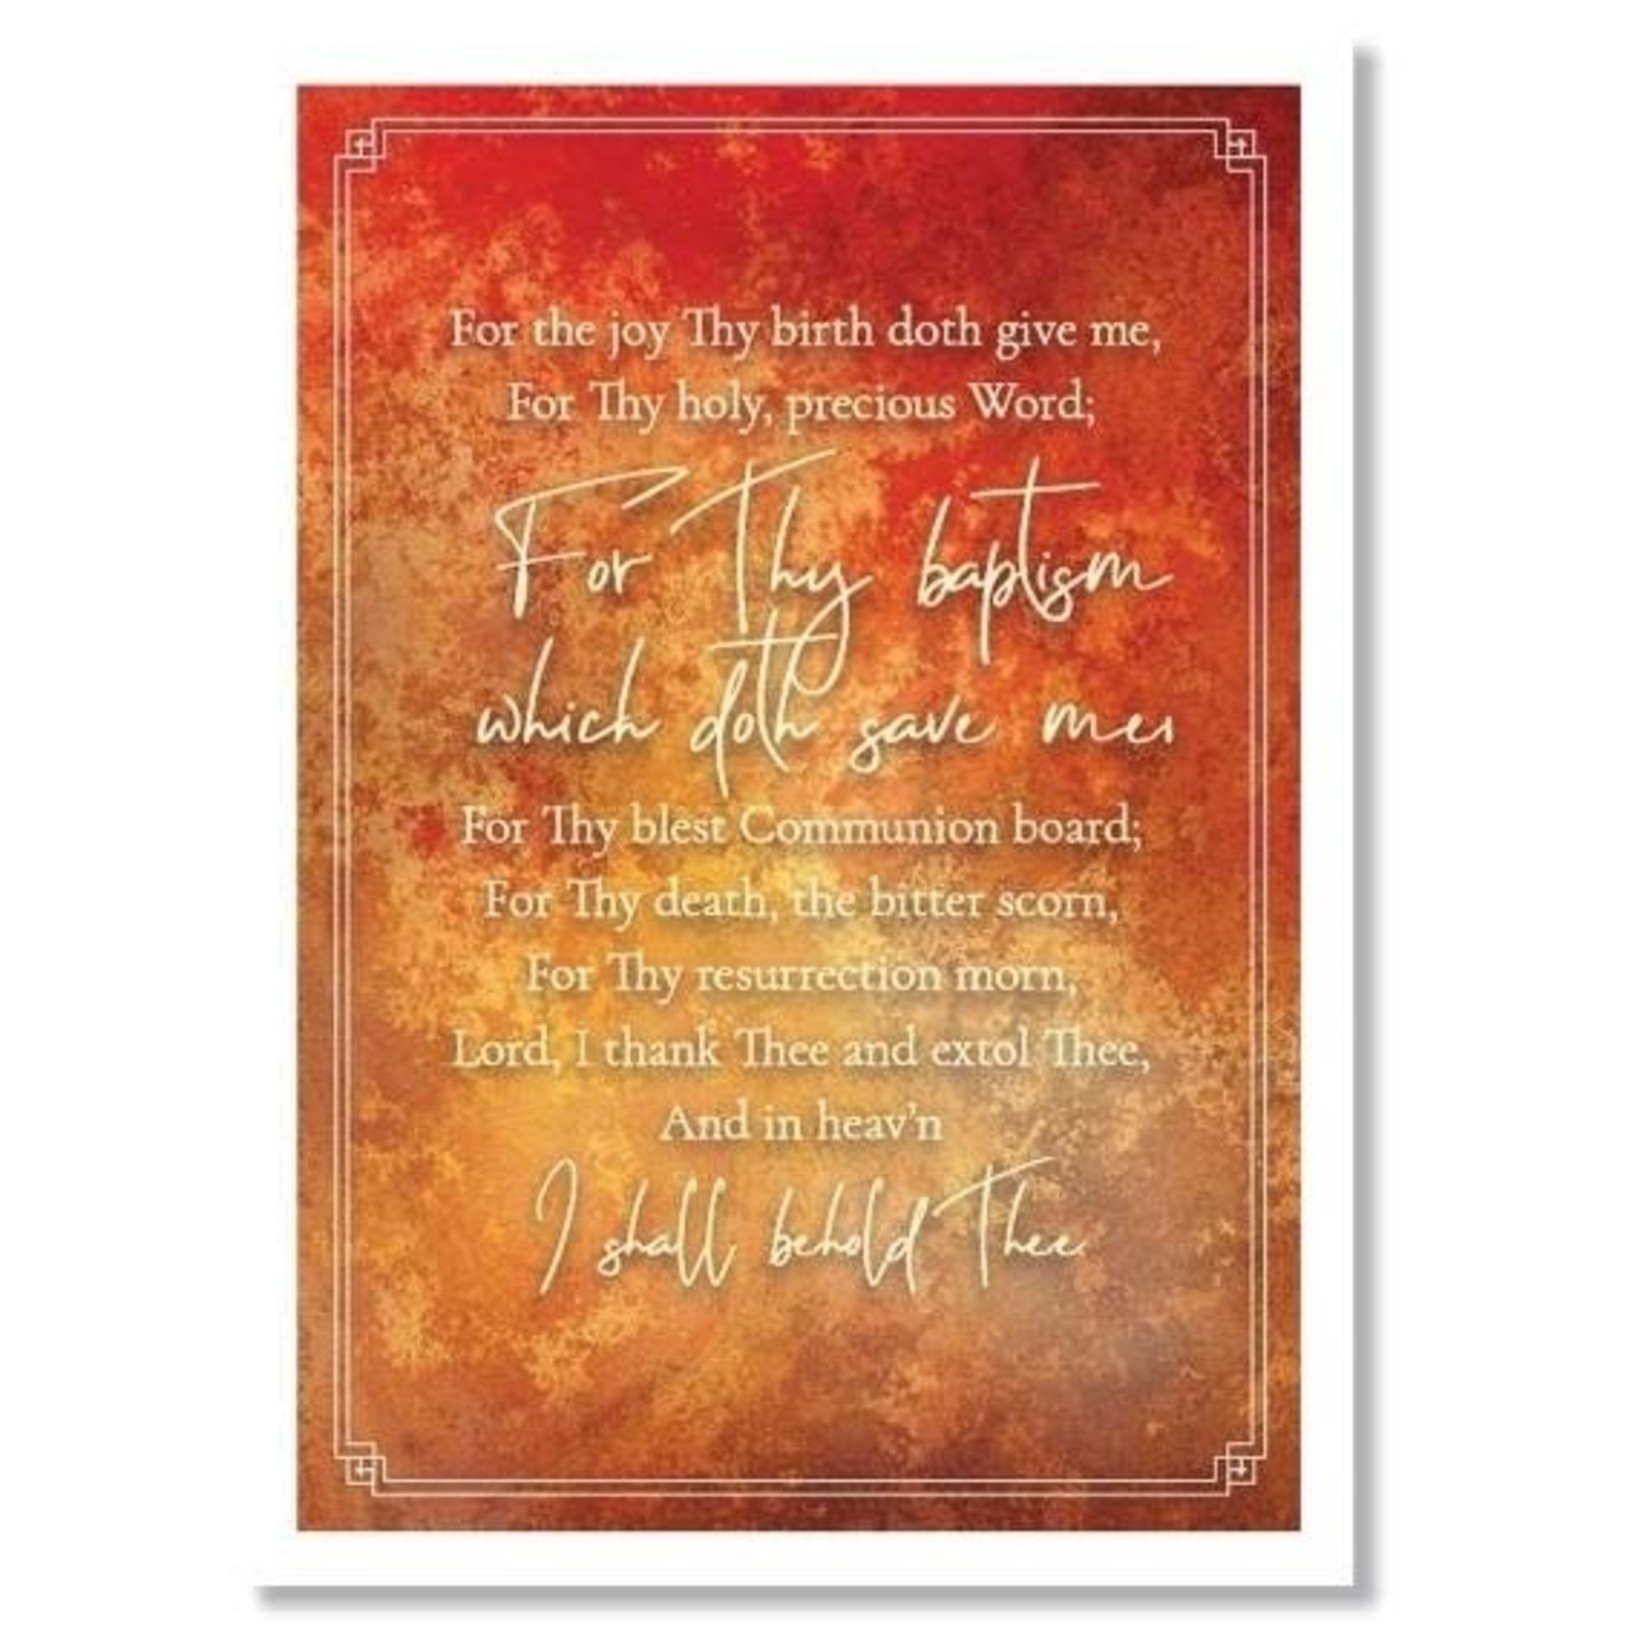 Hymns In My Heart Hymns In My Heart - 5x7" Greeting Card - Baptism - For the Joy Thy Birth